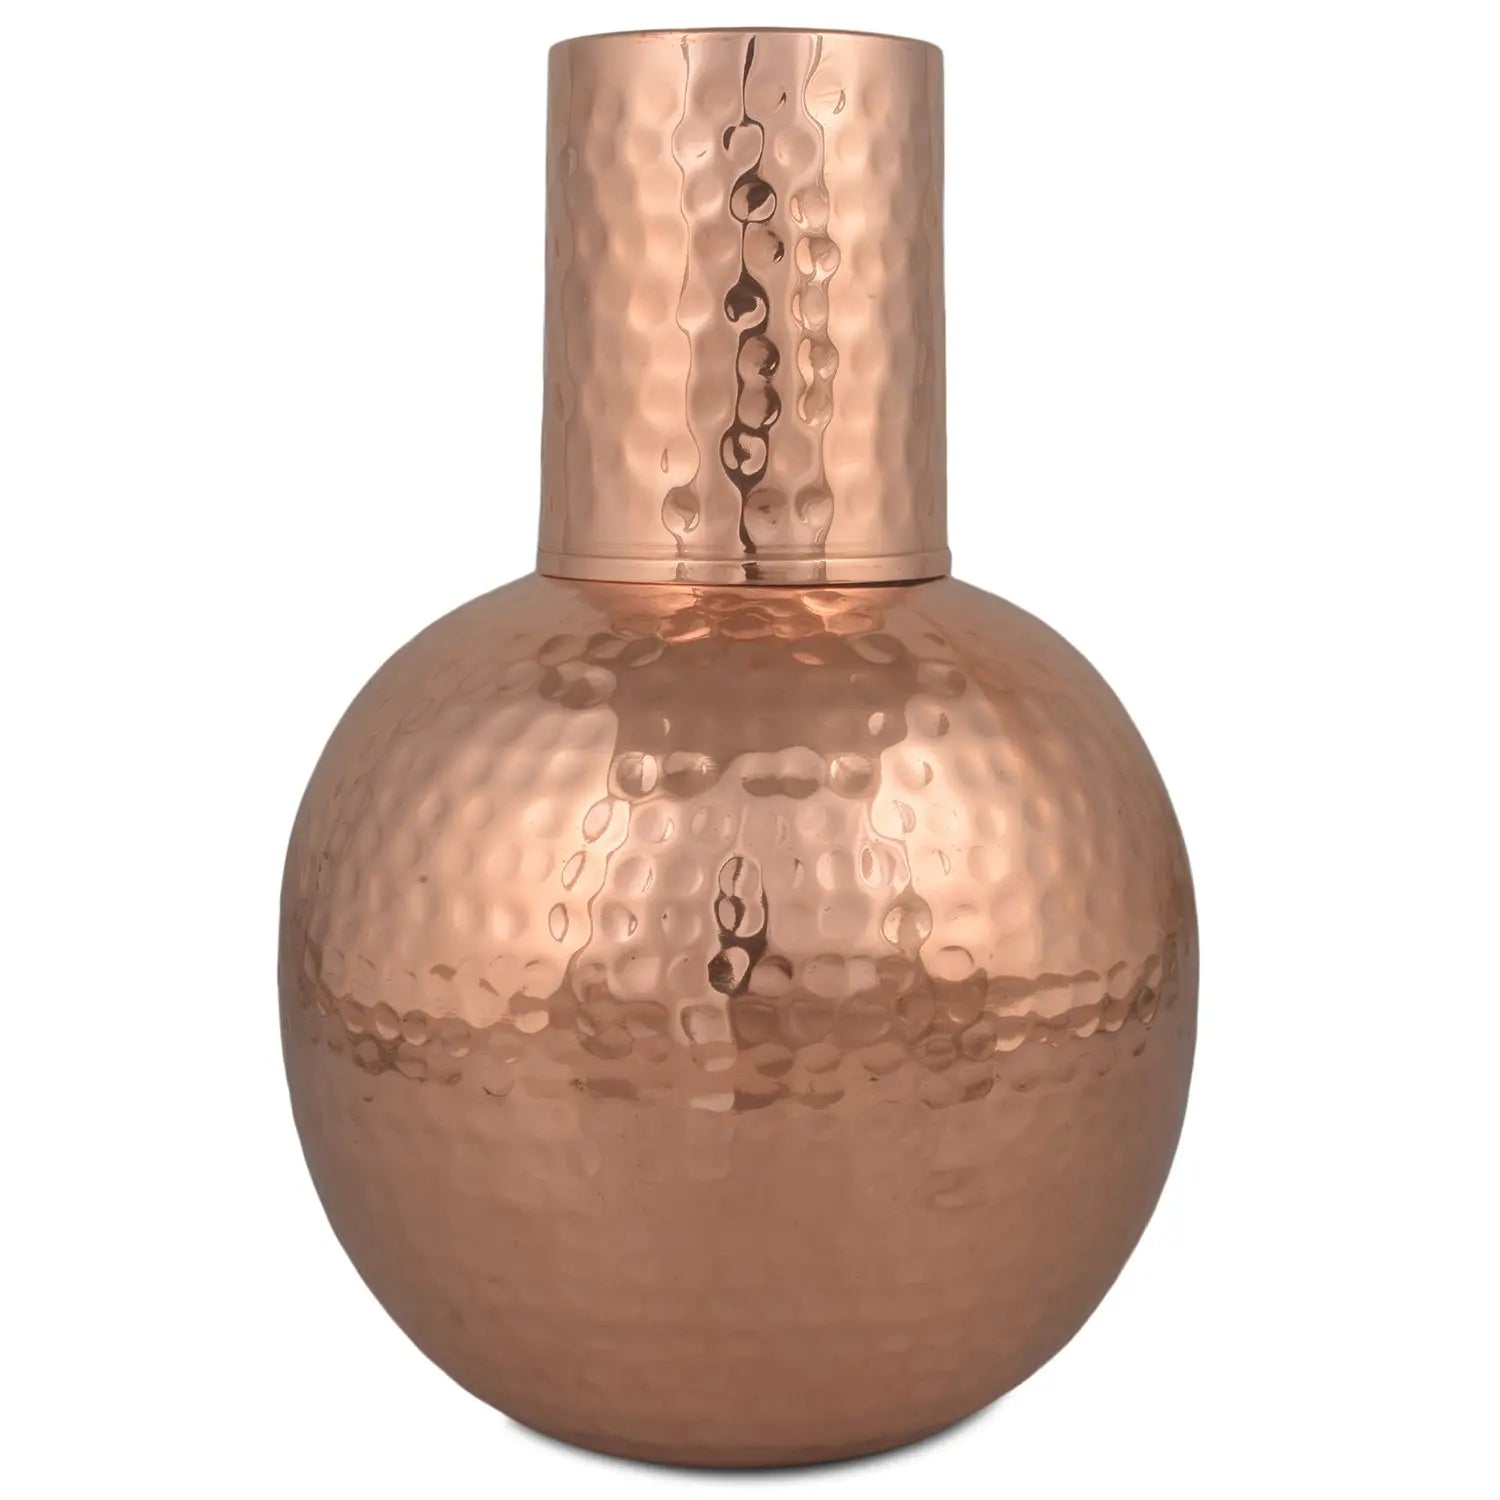 Pure Copper Surai Glass Hammered Design Bedroom Water Copper Bottle with Inbuilt Glass, 2900 ml (Brown) - CROCKERY WALA AND COMPANY 